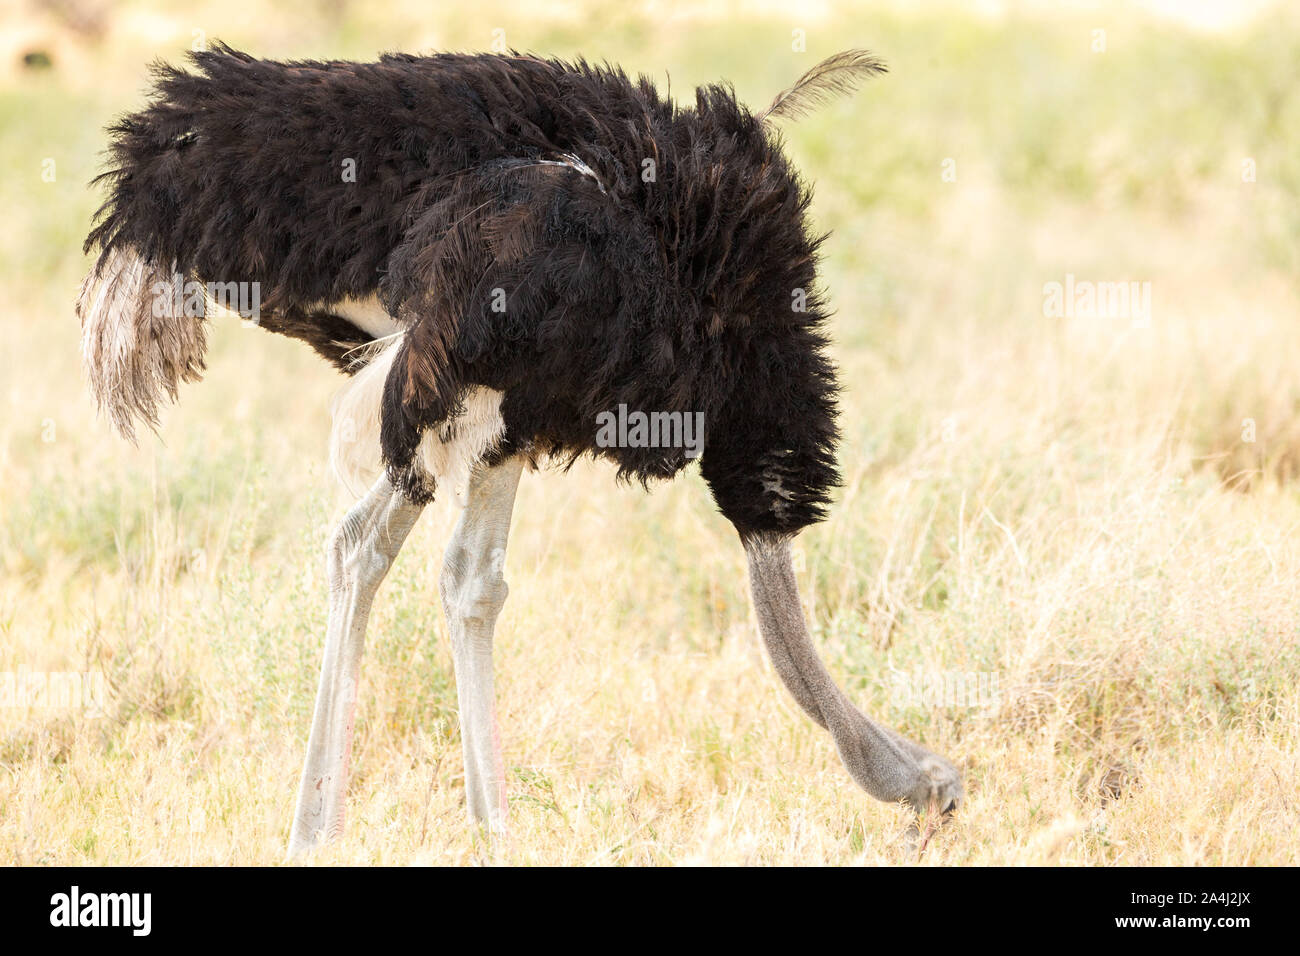 Male ostrich with the head deep in the grass, Etosha, Namibia, Africa Stock Photo